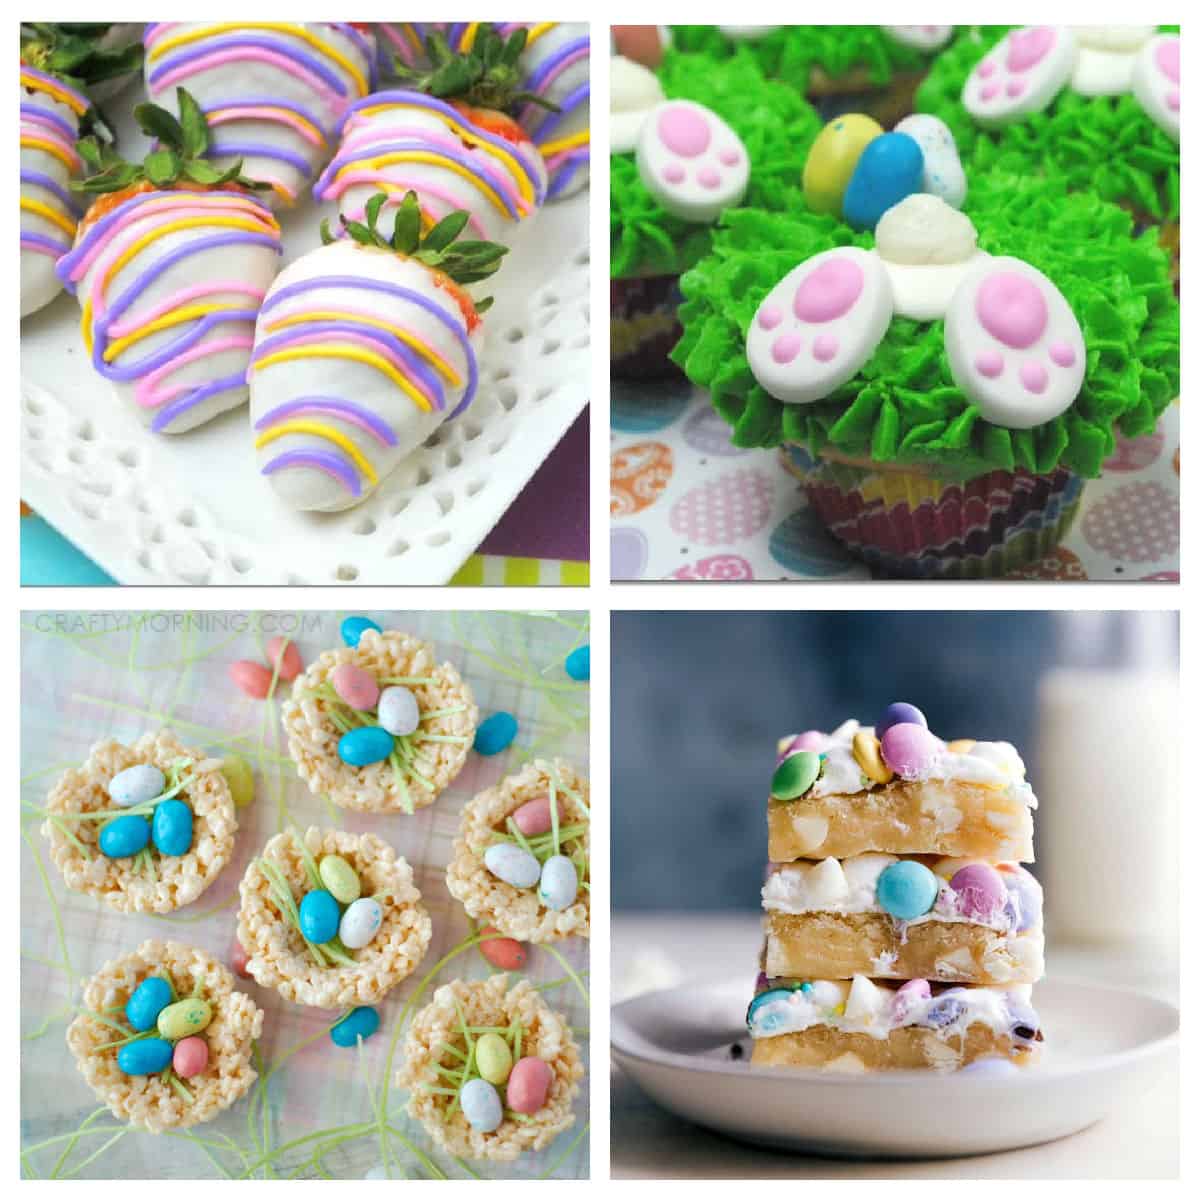 White chocolate covered strawberries, Easter bunny butt cupcake, rice Krispie egg nests, Easter cookie bars in a collage.